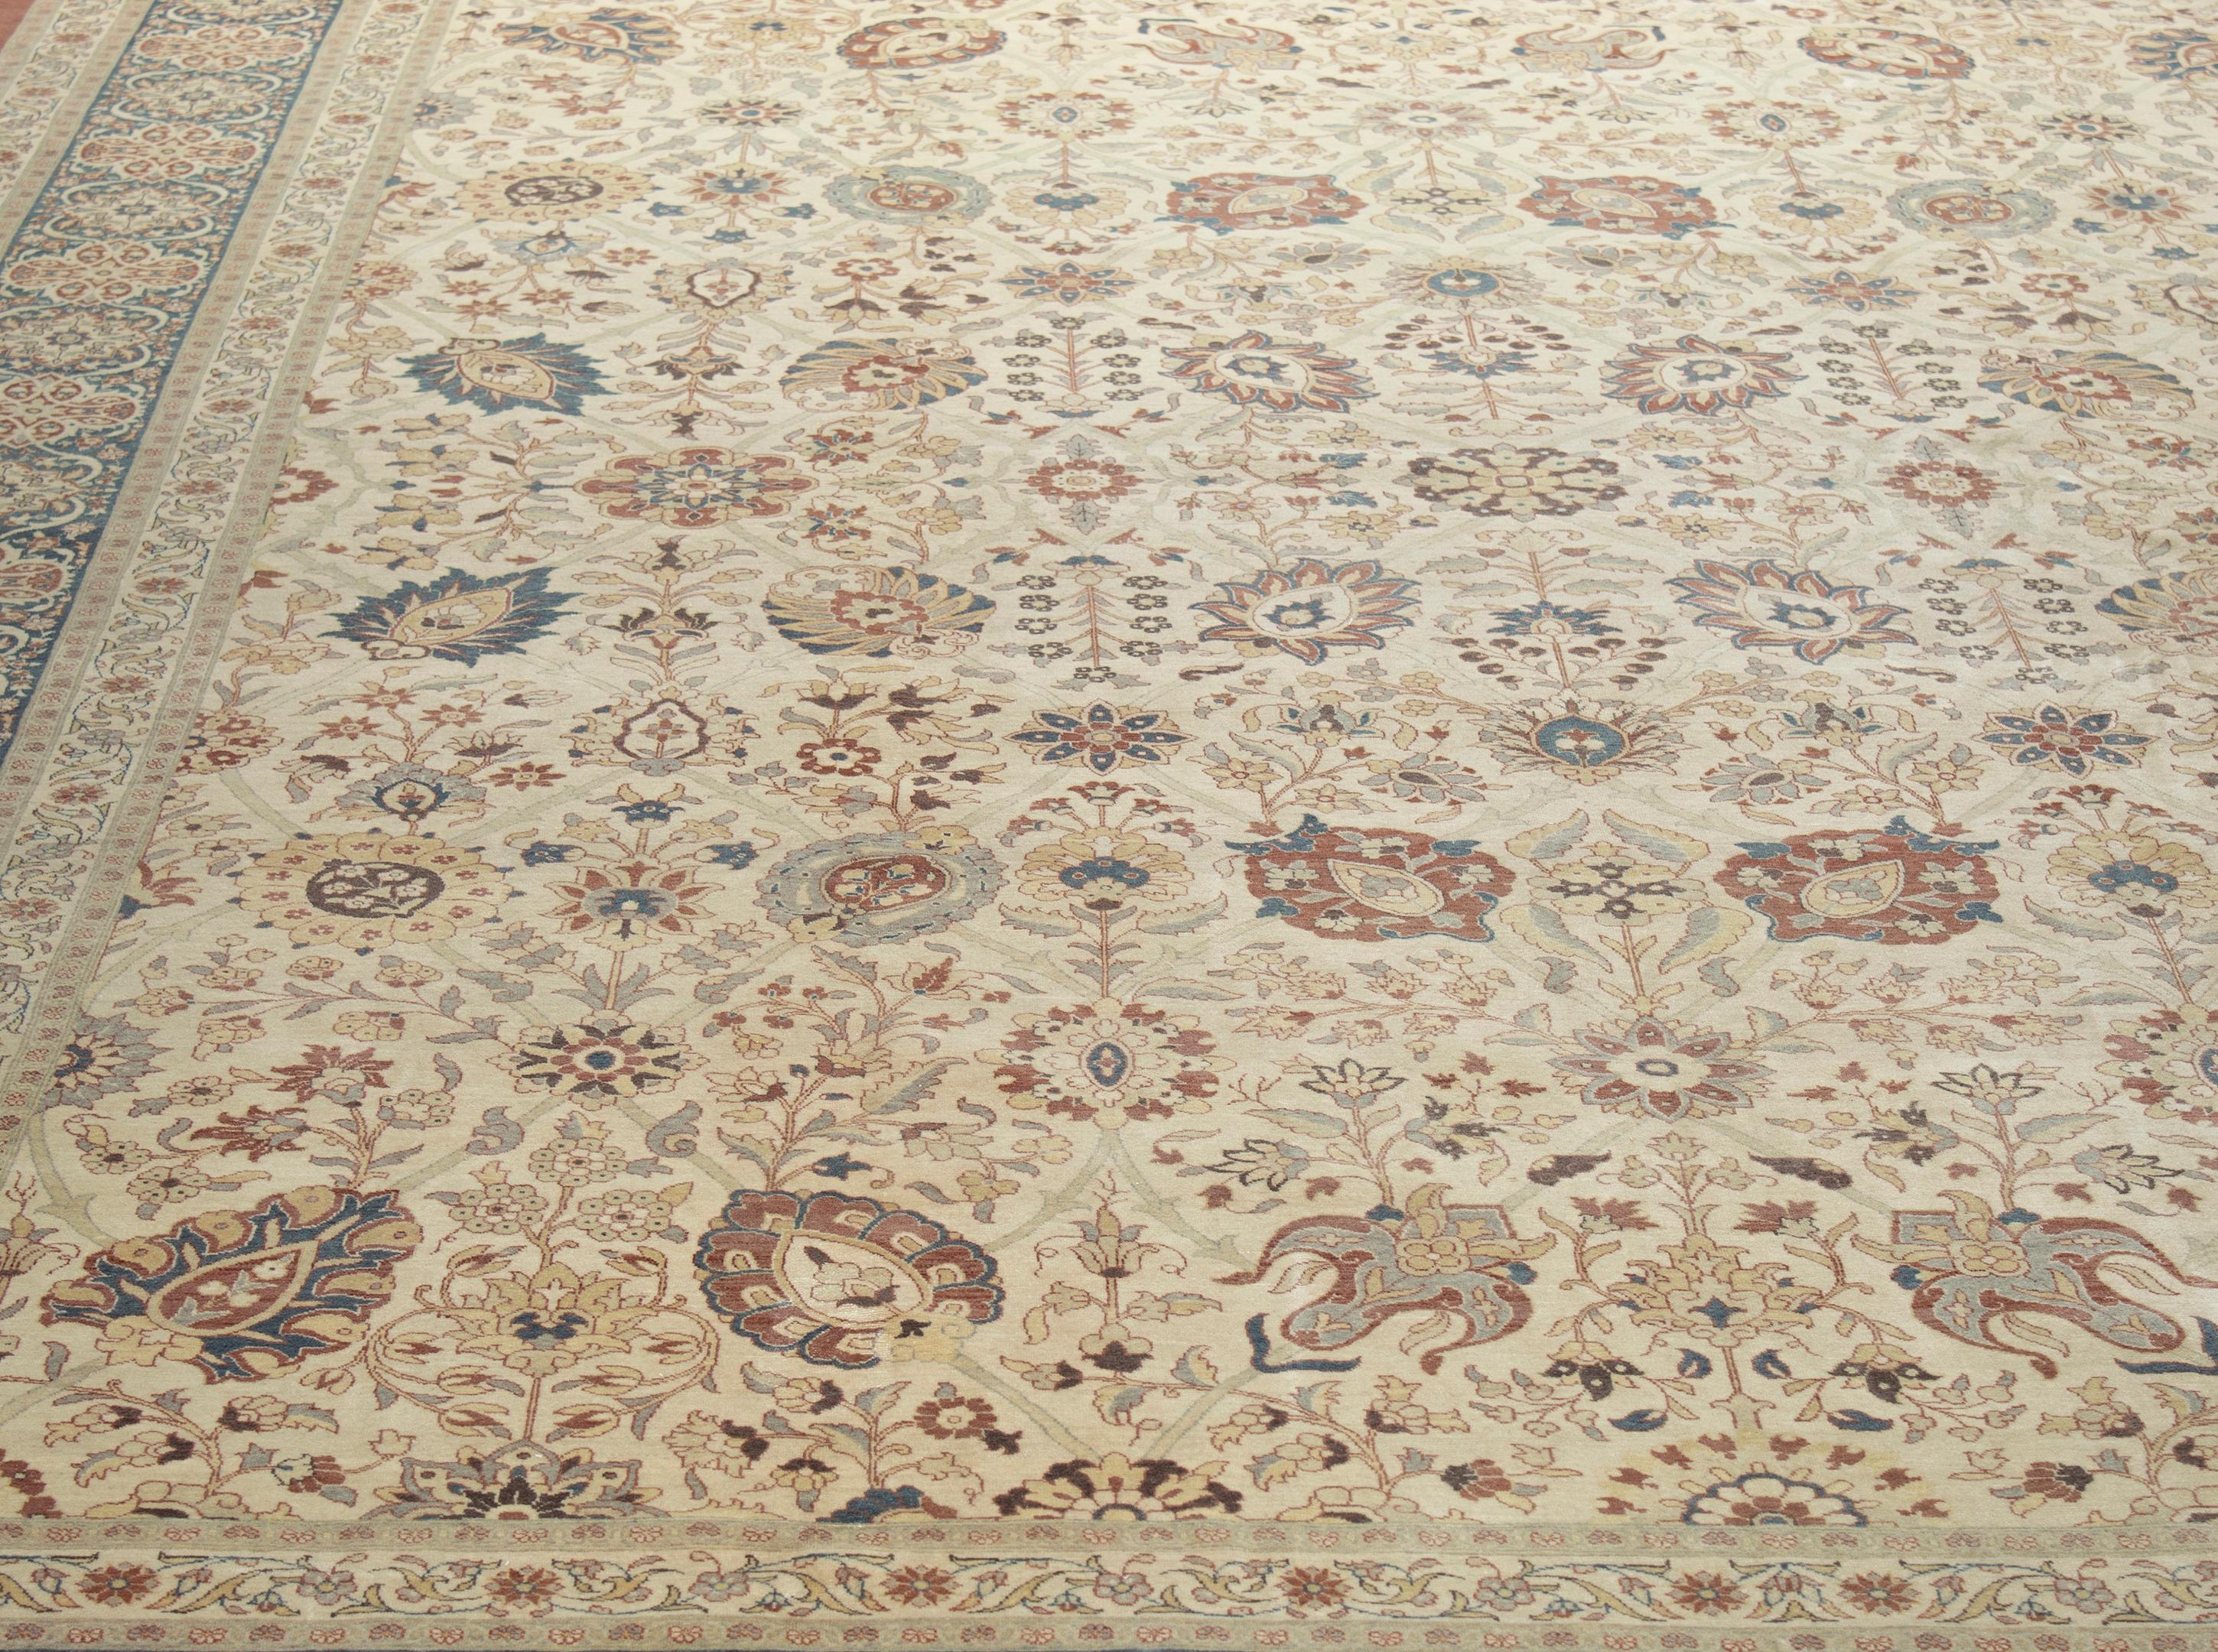 This rug resembles the rare and collectible antique Hadji Jalili Tabriz rugs that were produced in the 19th century and earlier. Due to their limited availability, NASIRI revived the ancient dyeing and weaving techniques that had dissolved over the